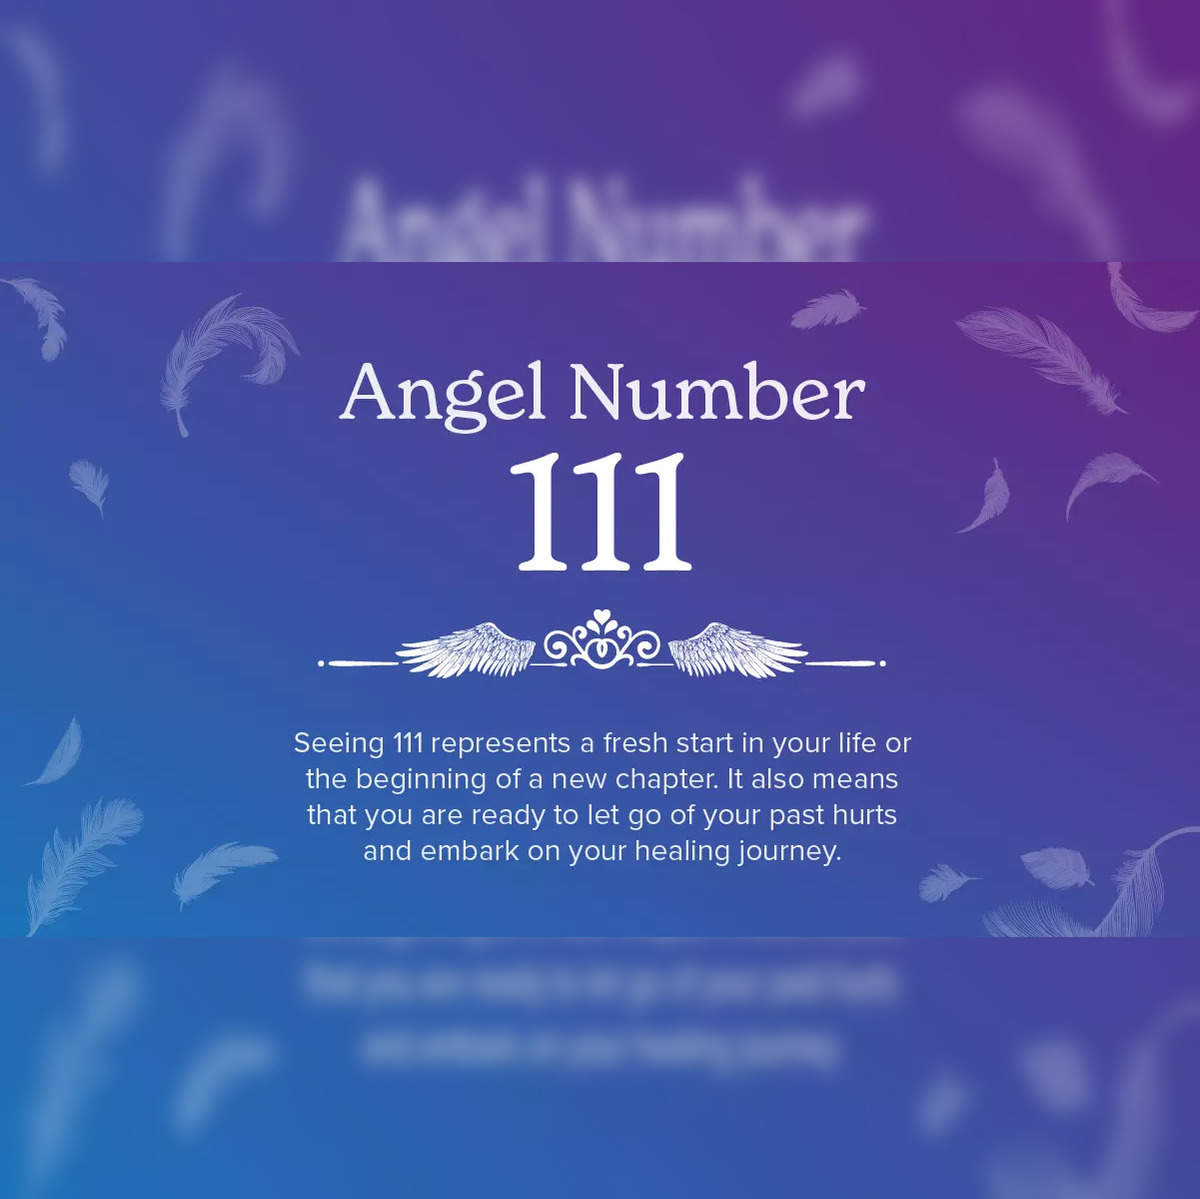 Your Angel Number: What It Means and How to Discover It